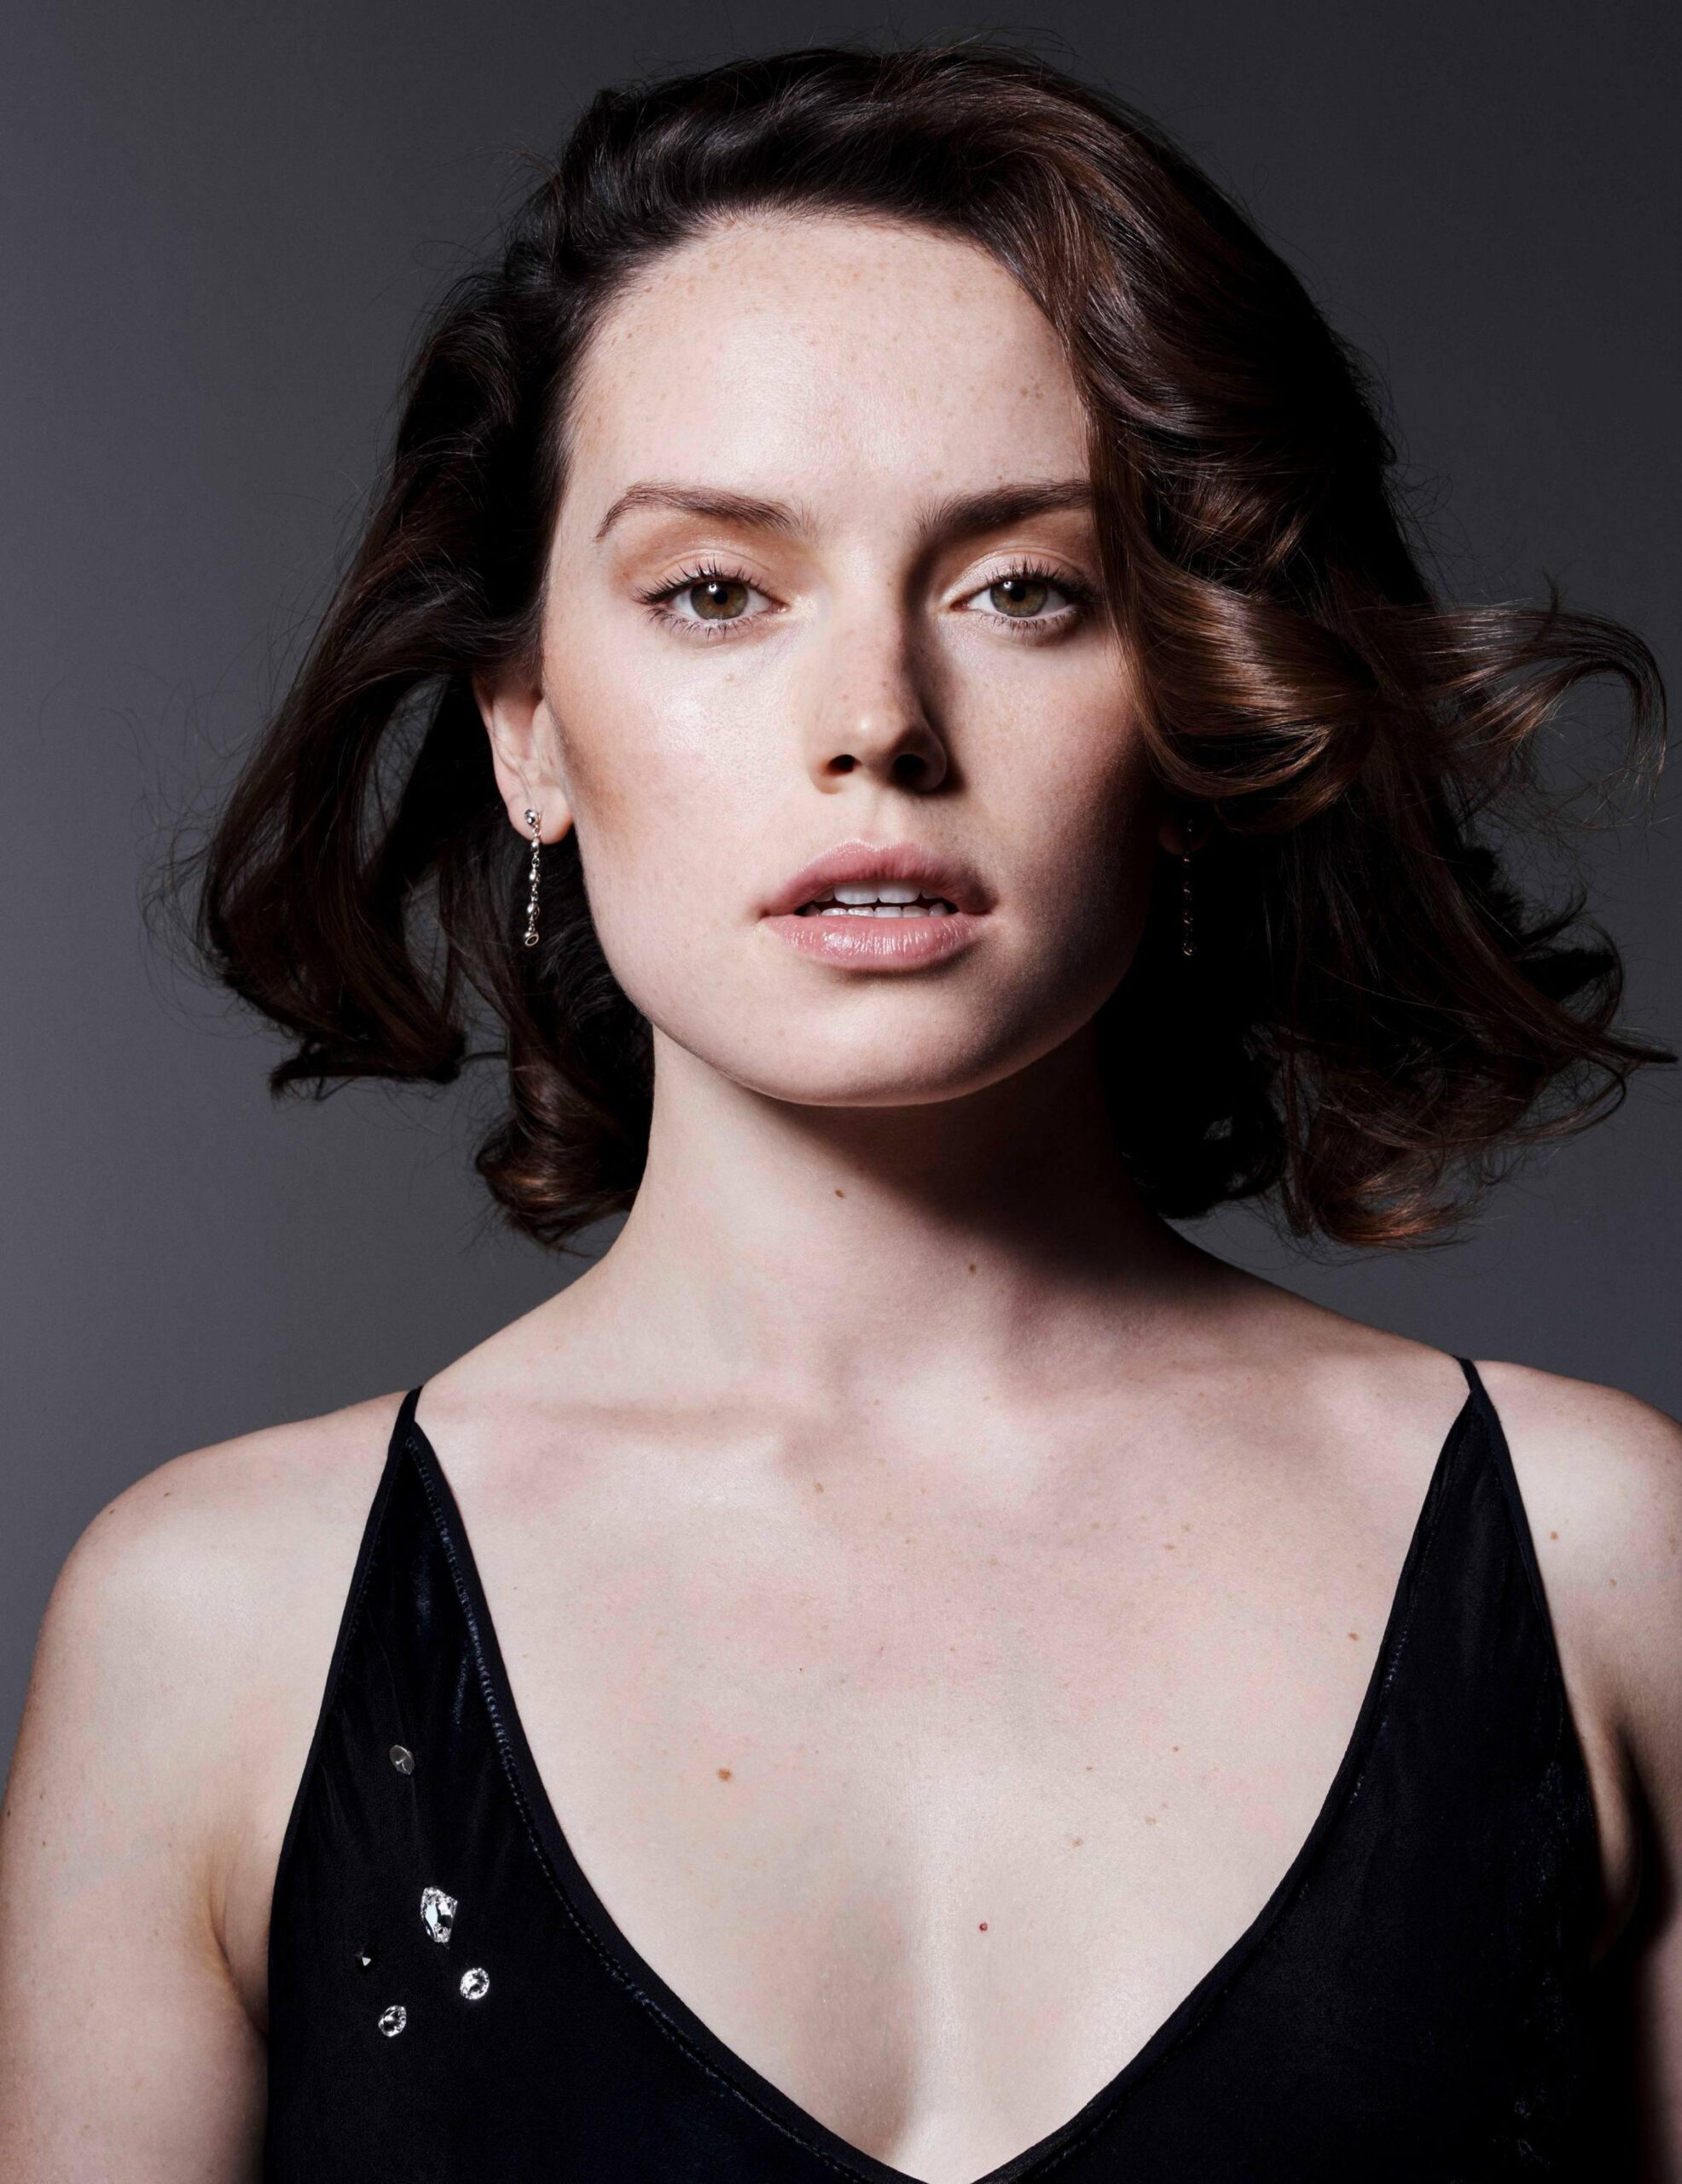 If you could have Daisy Ridley alone for half an